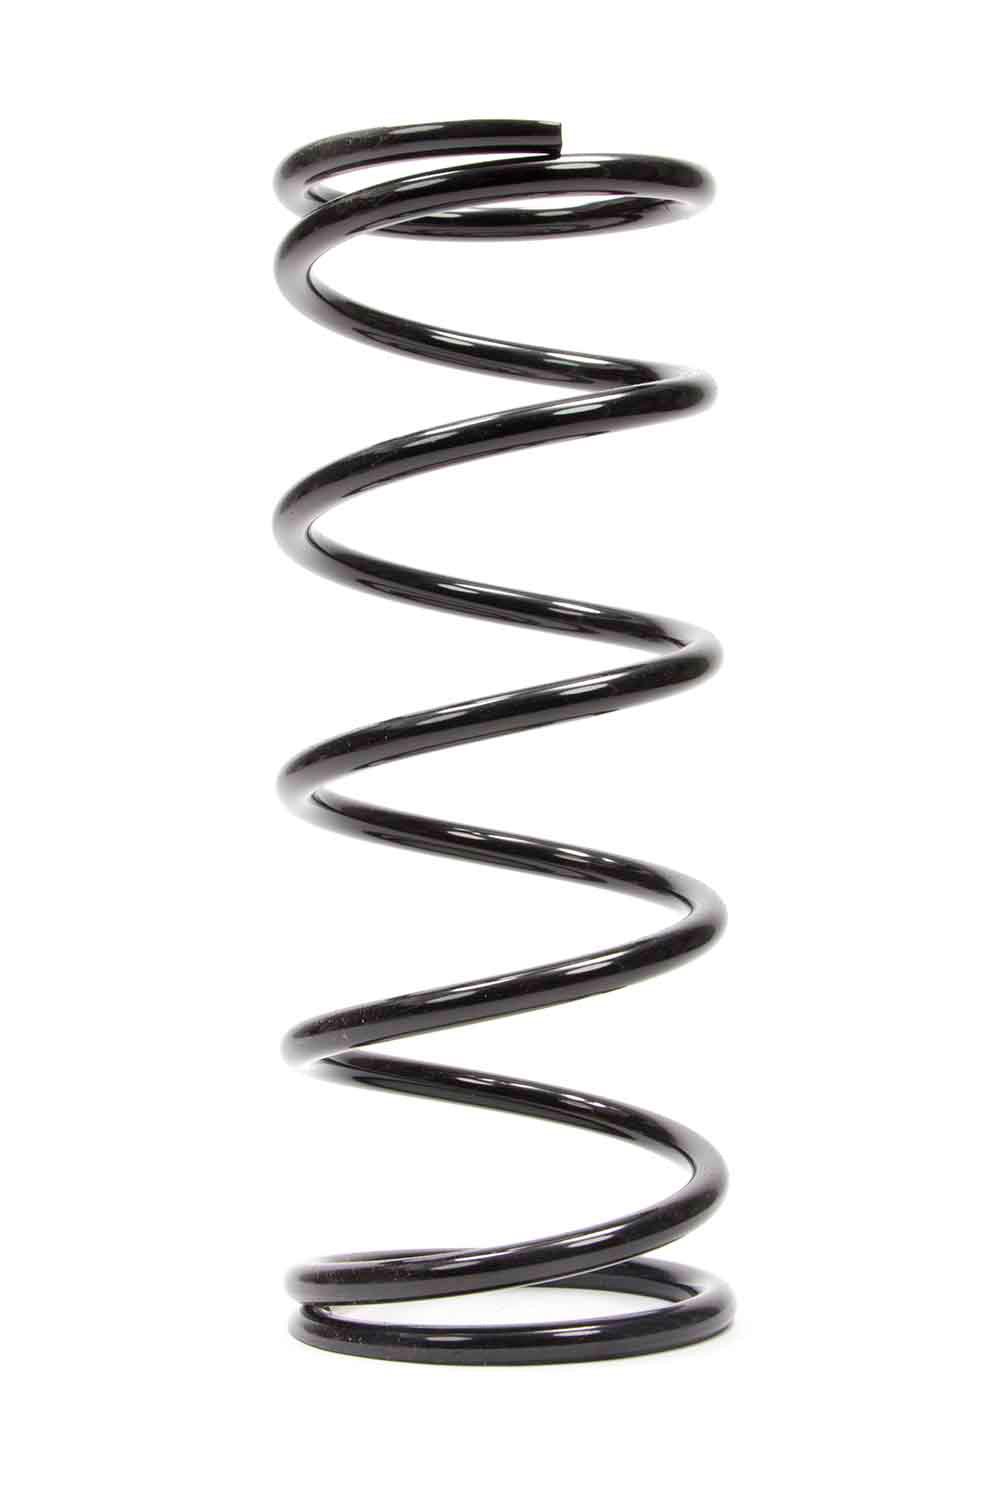 Conv Rear Spring 5in x 13in x 275 - Burlile Performance Products